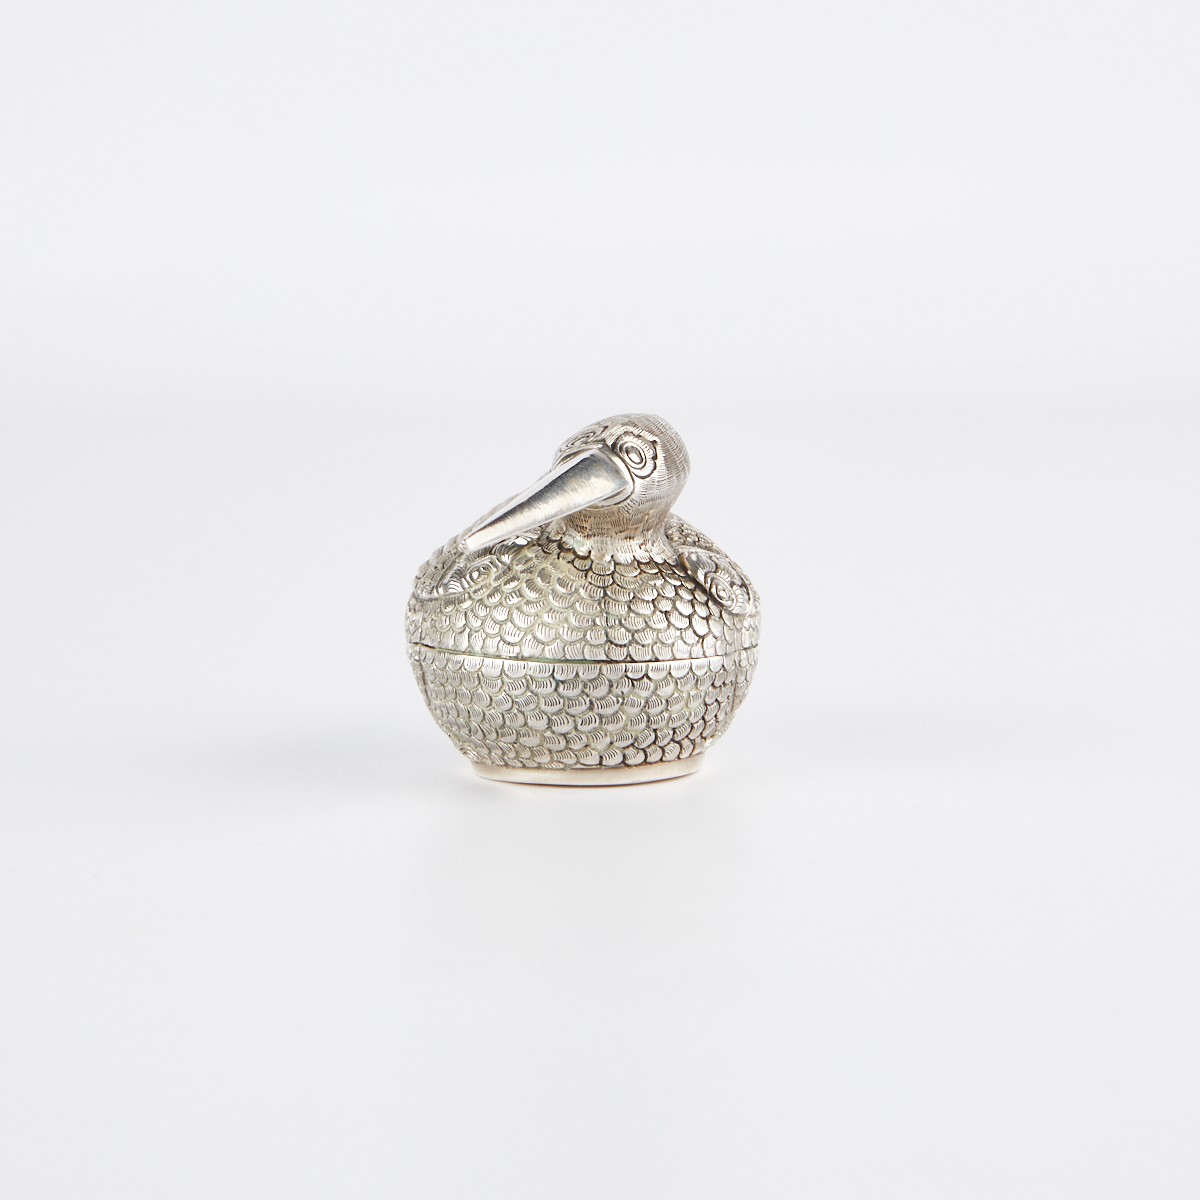 Cambodian Small Sterling Silver Bird Box - Image 3 of 8